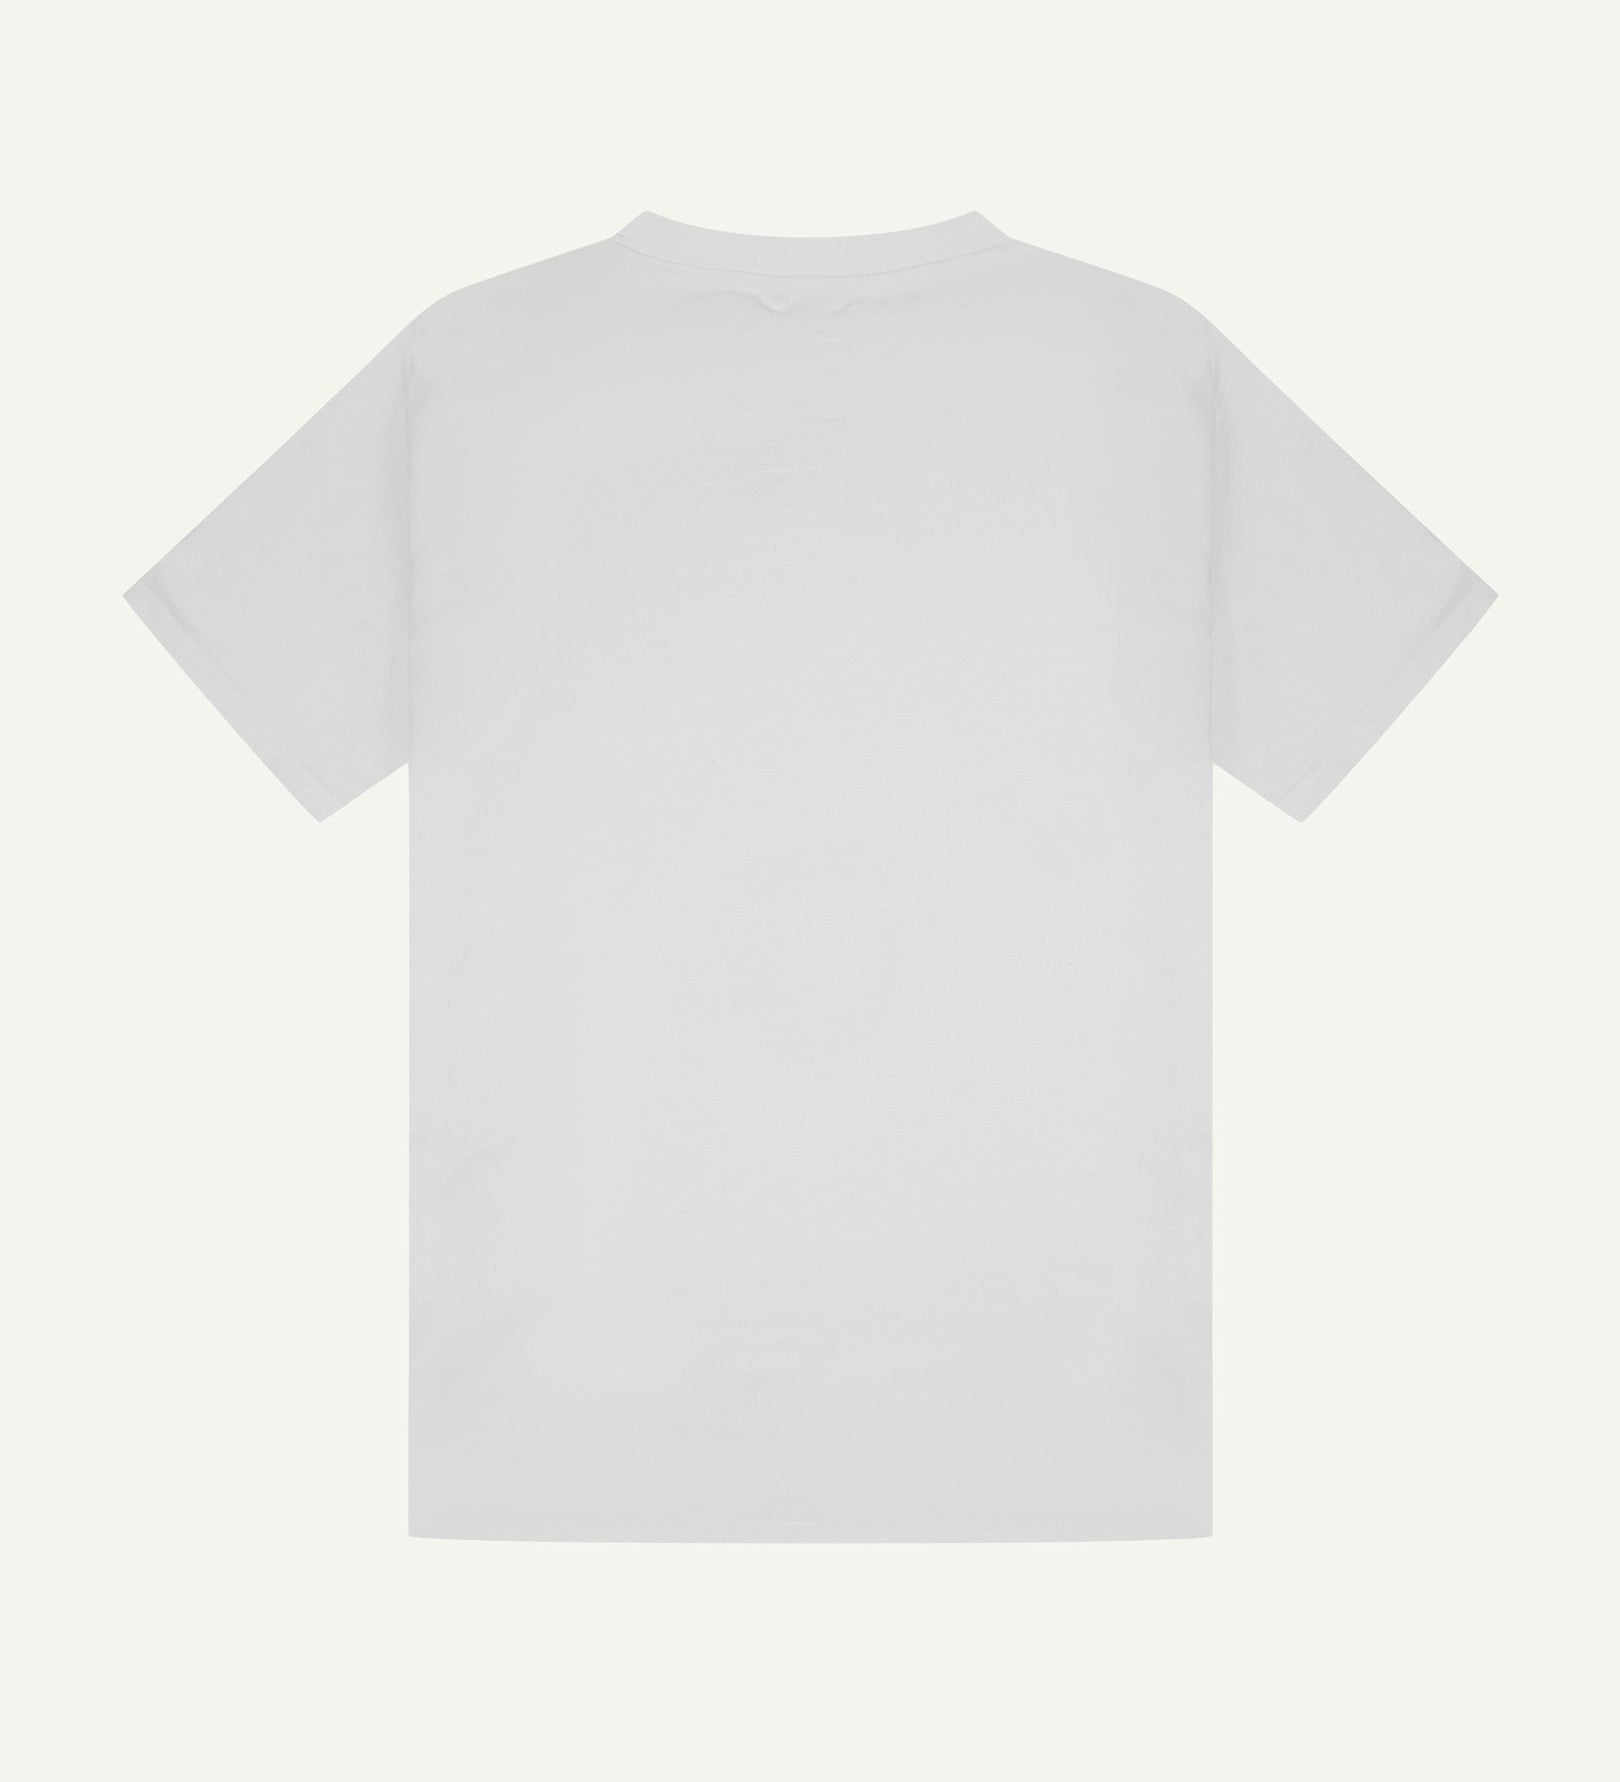 Back view of white organic cotton Uskees short-sleeved T-shirt.